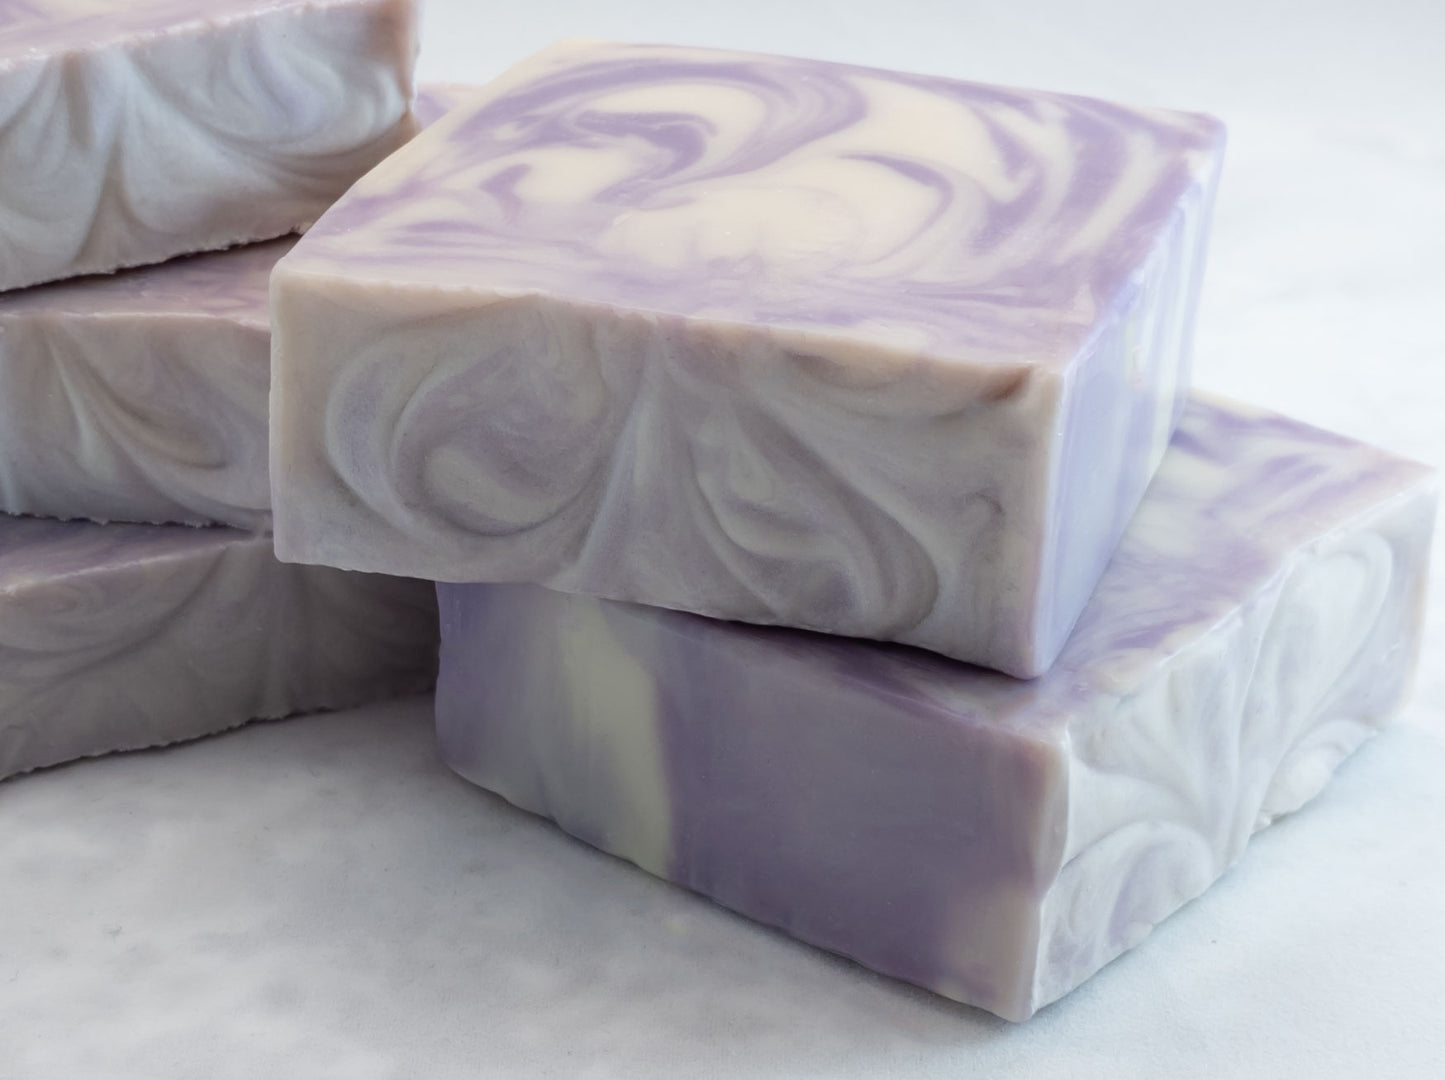 Just relax scented cold process soap 5 bars laying in the image